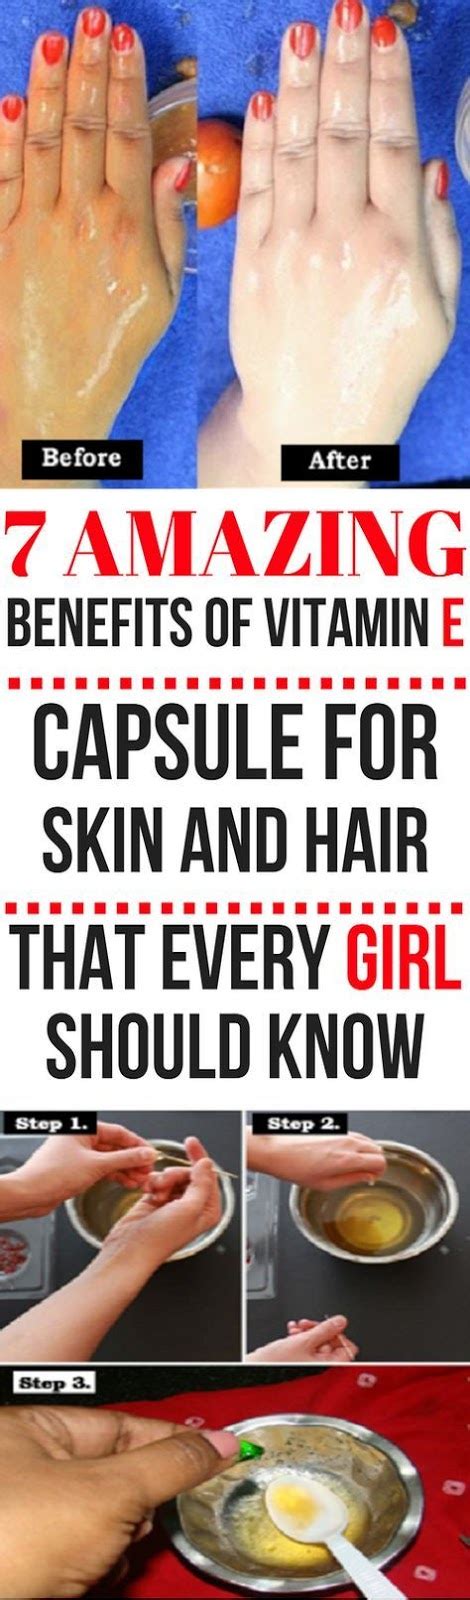 Vitamin e occurs naturally in most diets and oils or synthetically through capsules or supplements (in liquid or pill form ). 7 AMAZING BENEFITS OF VITAMIN E CAPSULE FOR SKIN AND HAIR ...